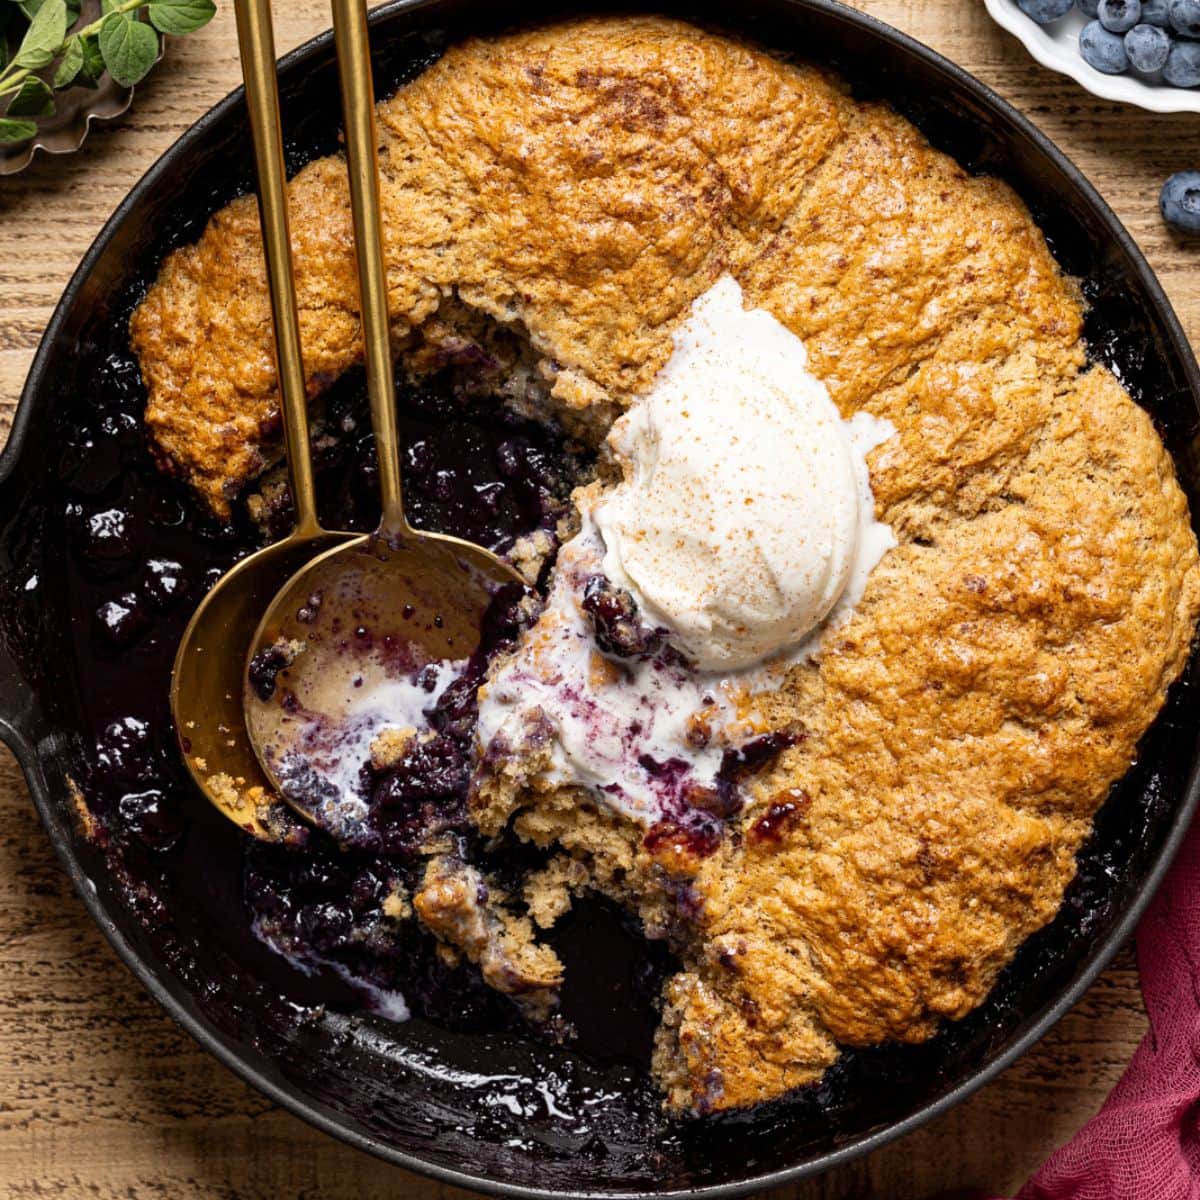 Cobbler scooped out with ice cream and two spoons.